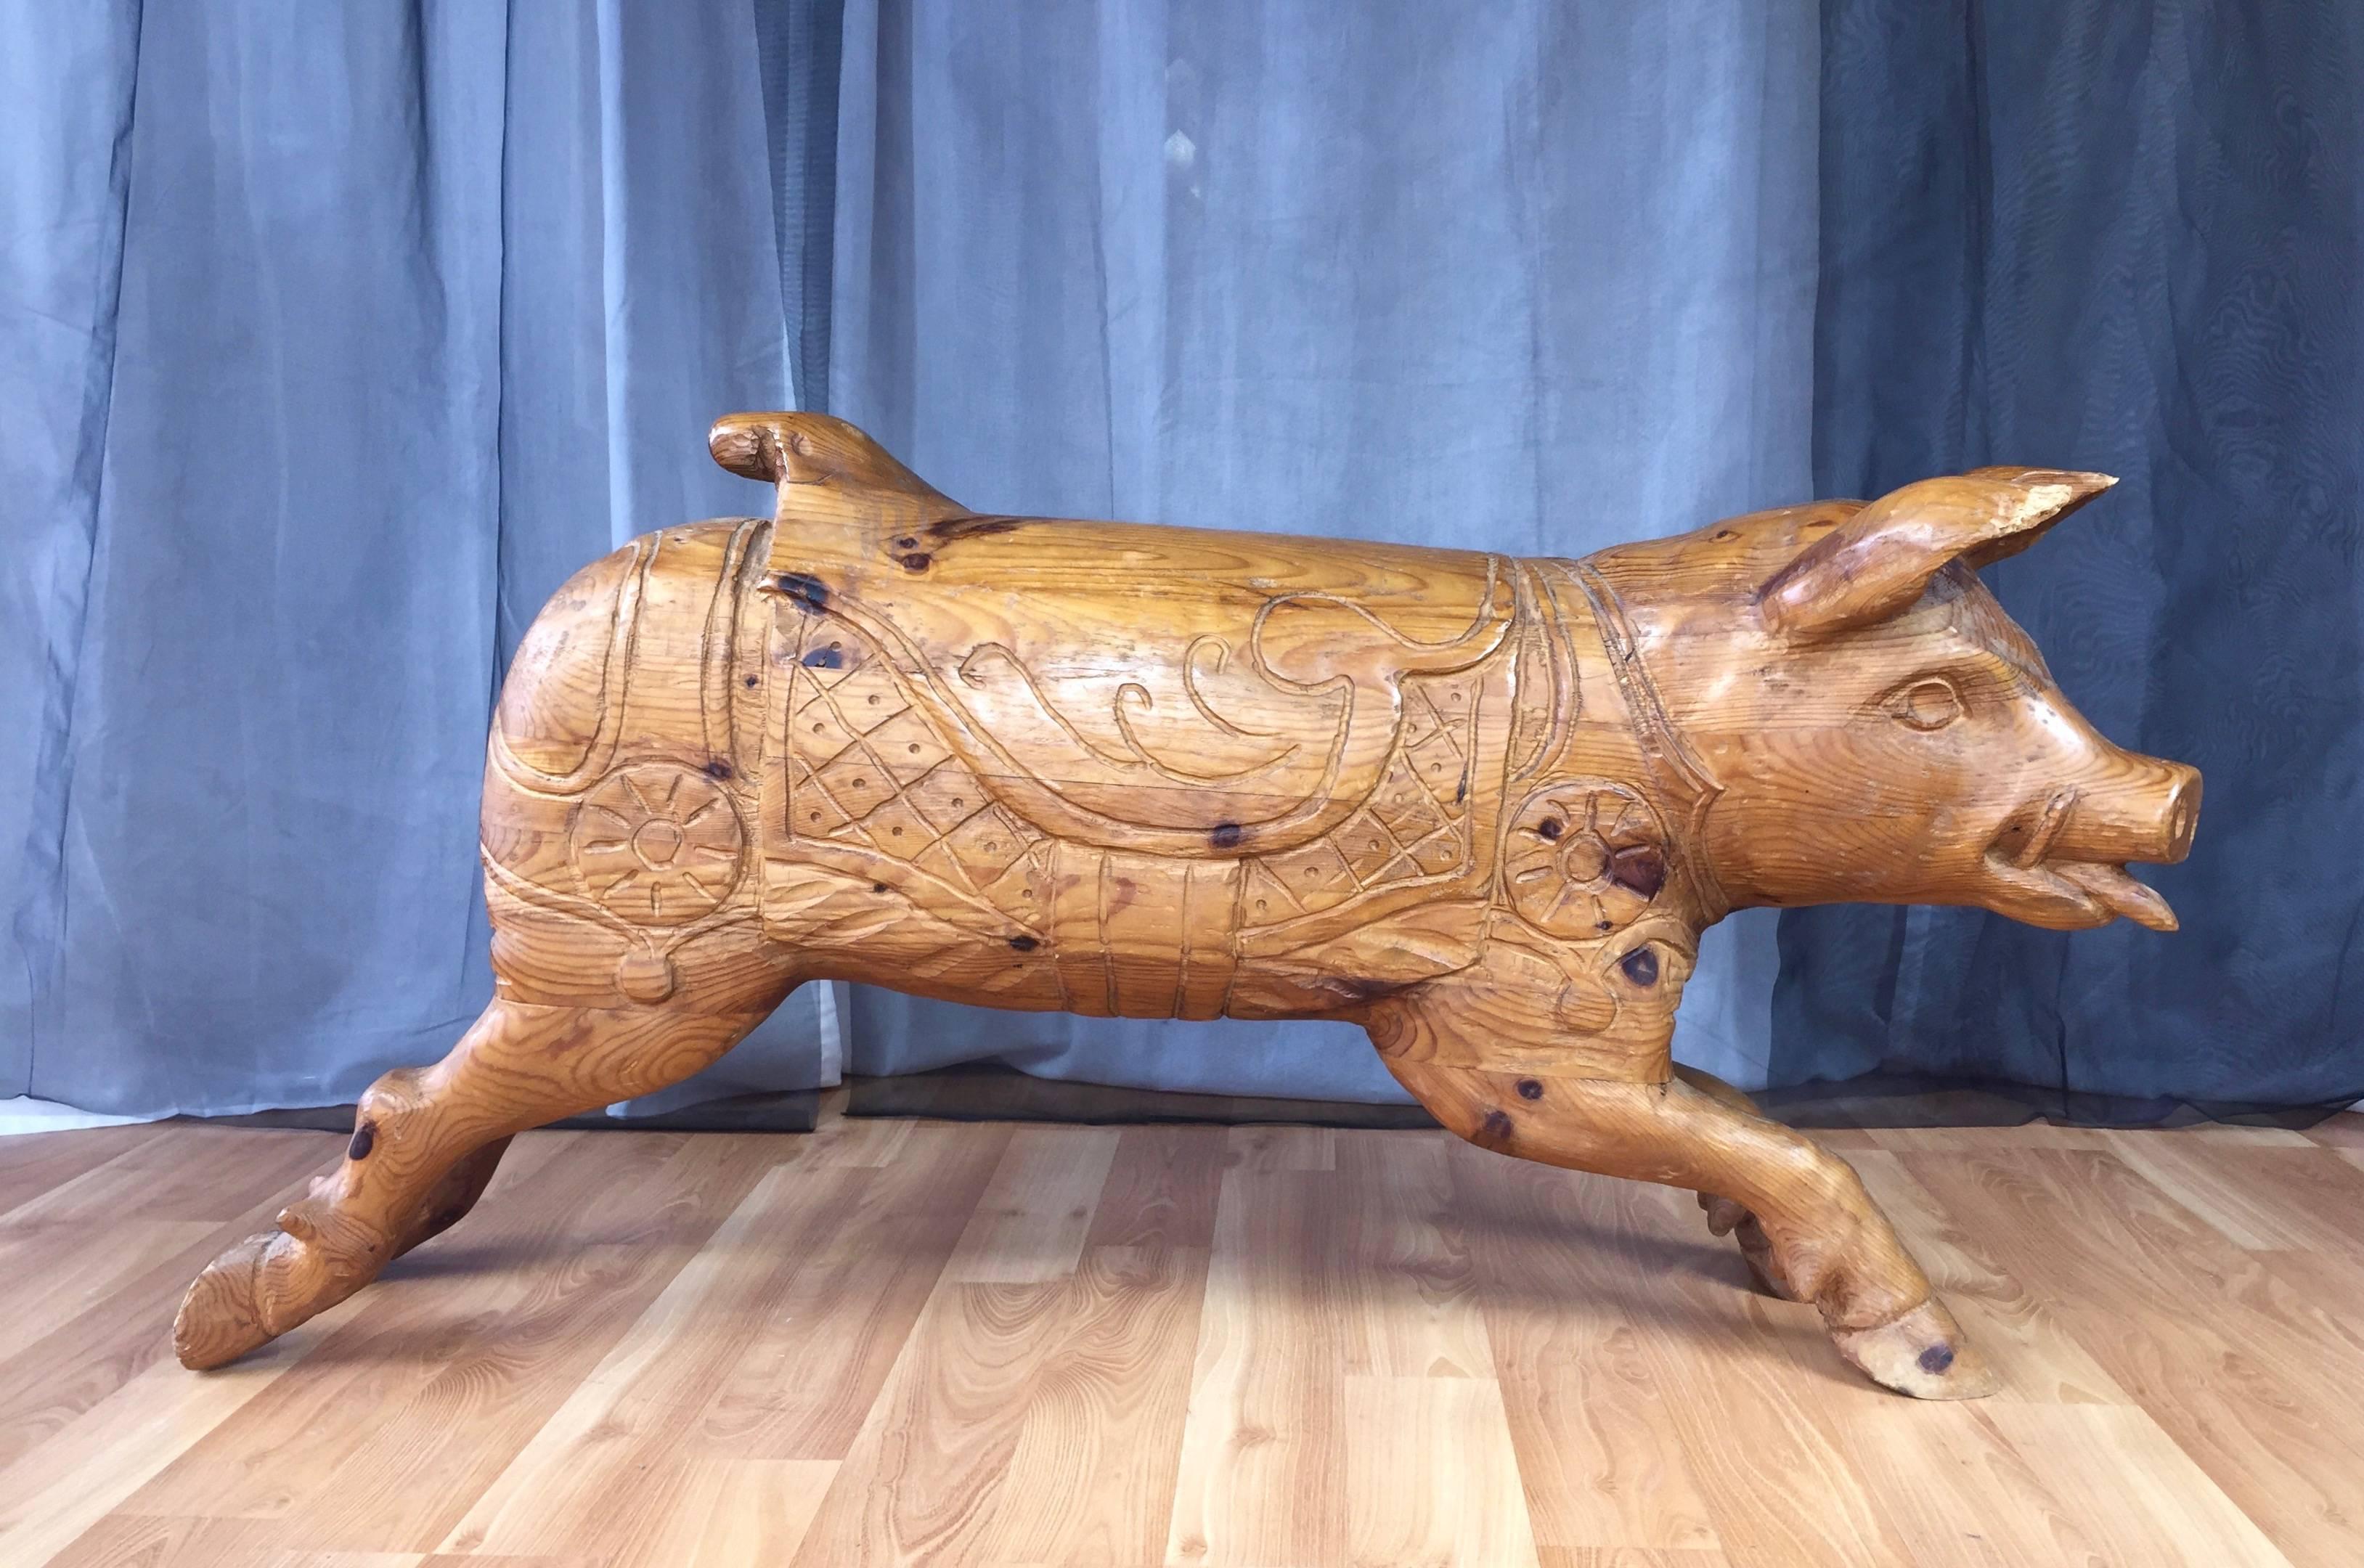 A very large hand-carved solid wood boar or pig sculpture believed to have originally been destined for a carousel or merry-go-round.

Though apparently abandoned just before completion, this happy and handsome guy is full of character, from his